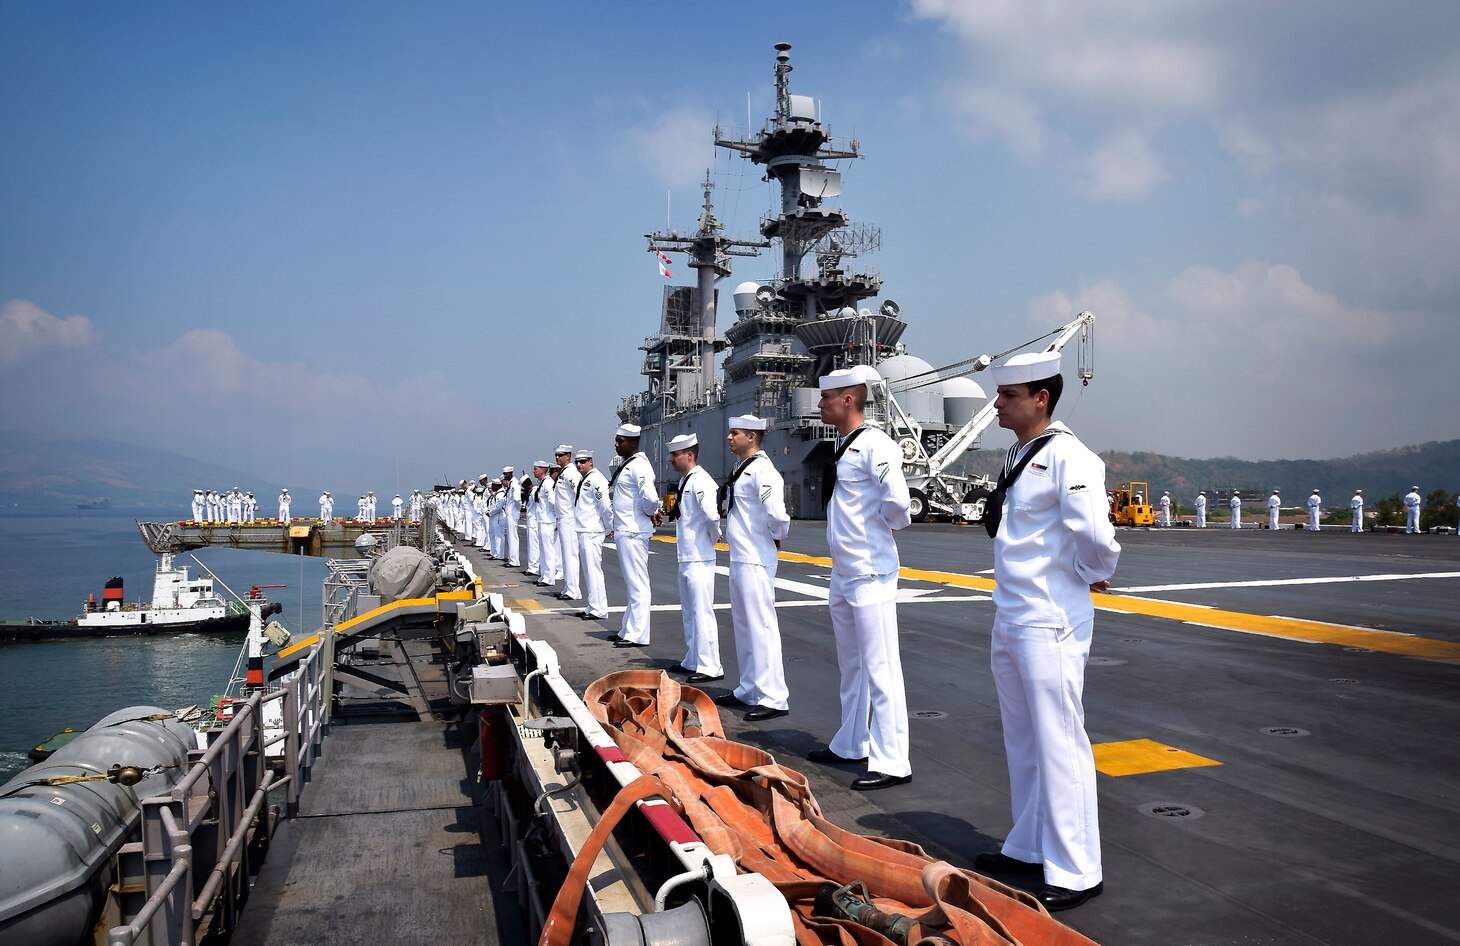 SUBIC BAY, Philippines (March 30, 2019) Sailors man the rails aboard the amphibious assault ship USS Wasp (LHD 1) as the ship arrives in Subic Bay, Philippines in support of Exercise Balikatan. Exercise Balikatan, in its 35th iteration, is an annual U.S., Philippine military training exercise focused on a variety of missions, including humanitarian assistance and disaster relief, counter-terrorism, and other combined military operations.